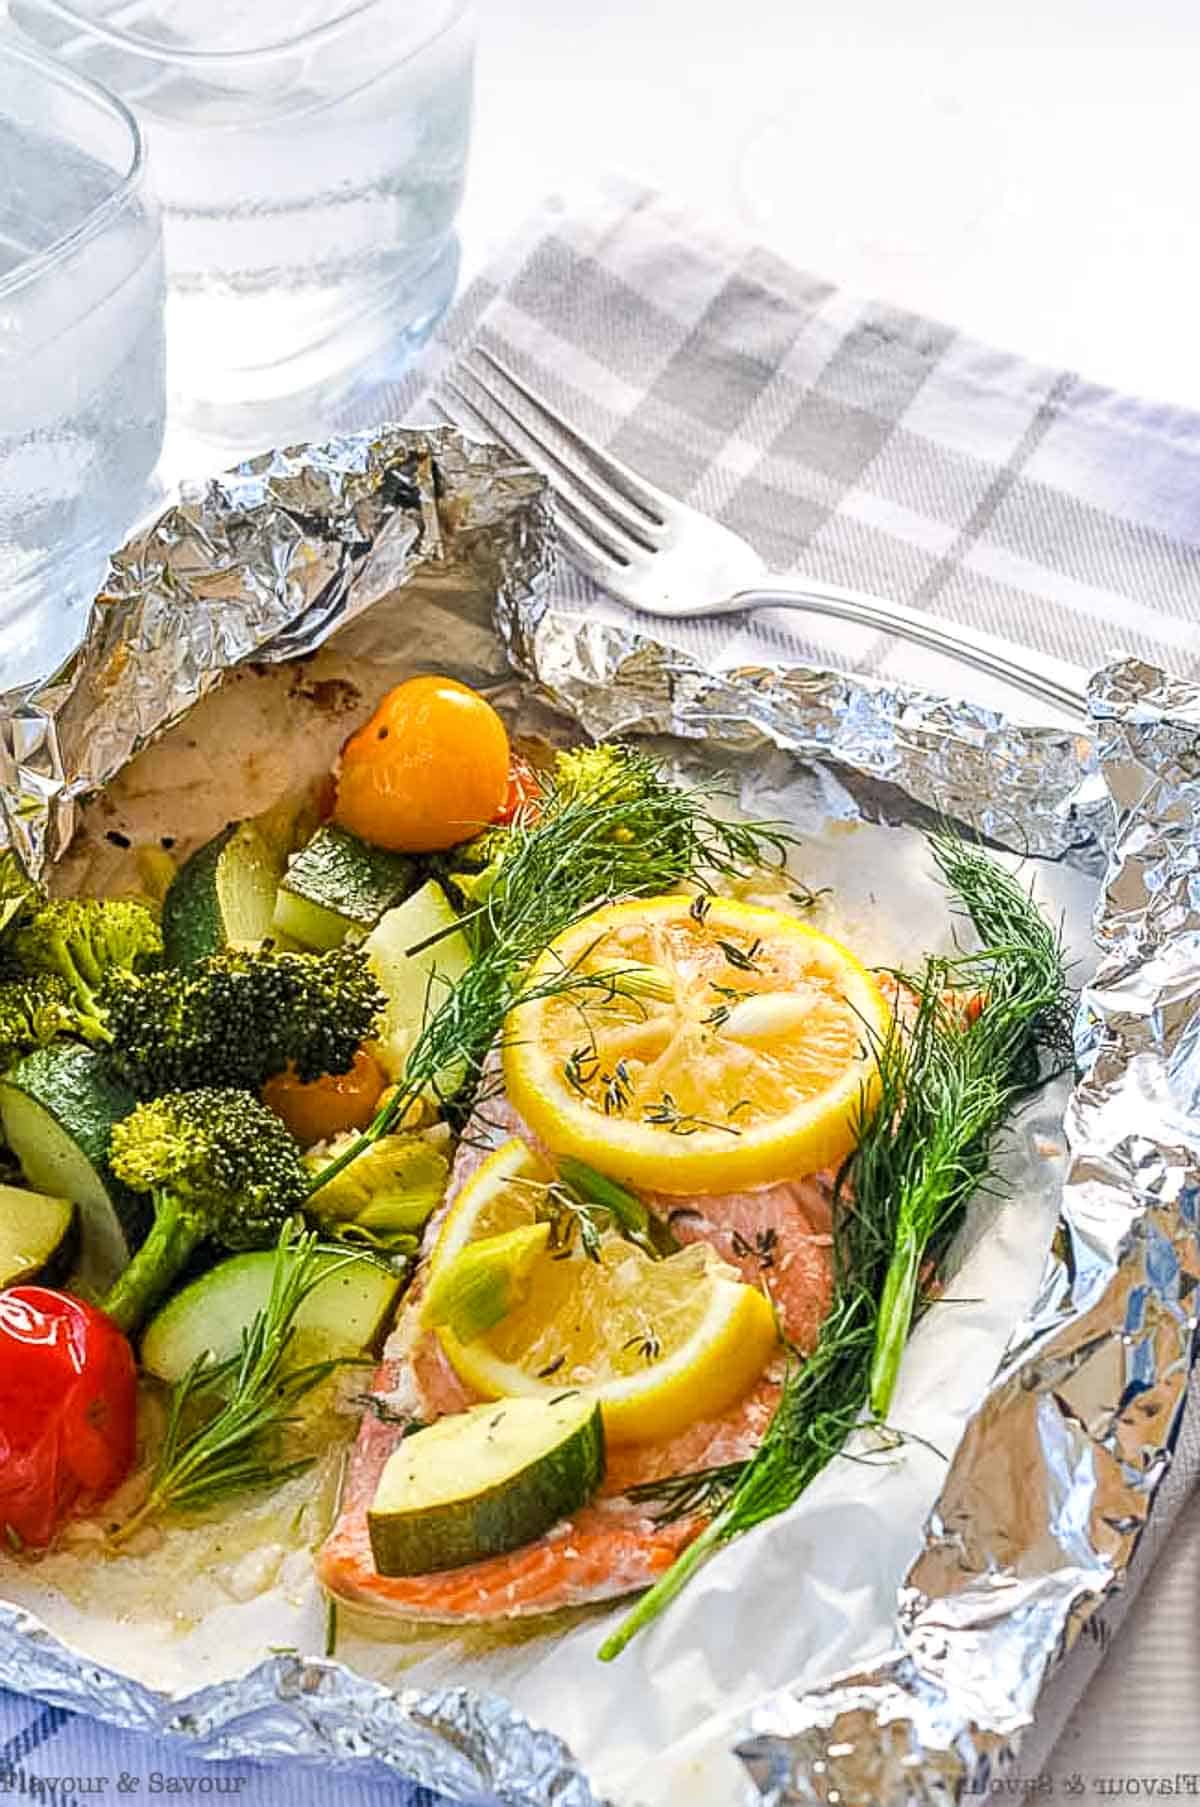 Wild salmon fillet with cooked vegetables and lemon slices in a foil packet.